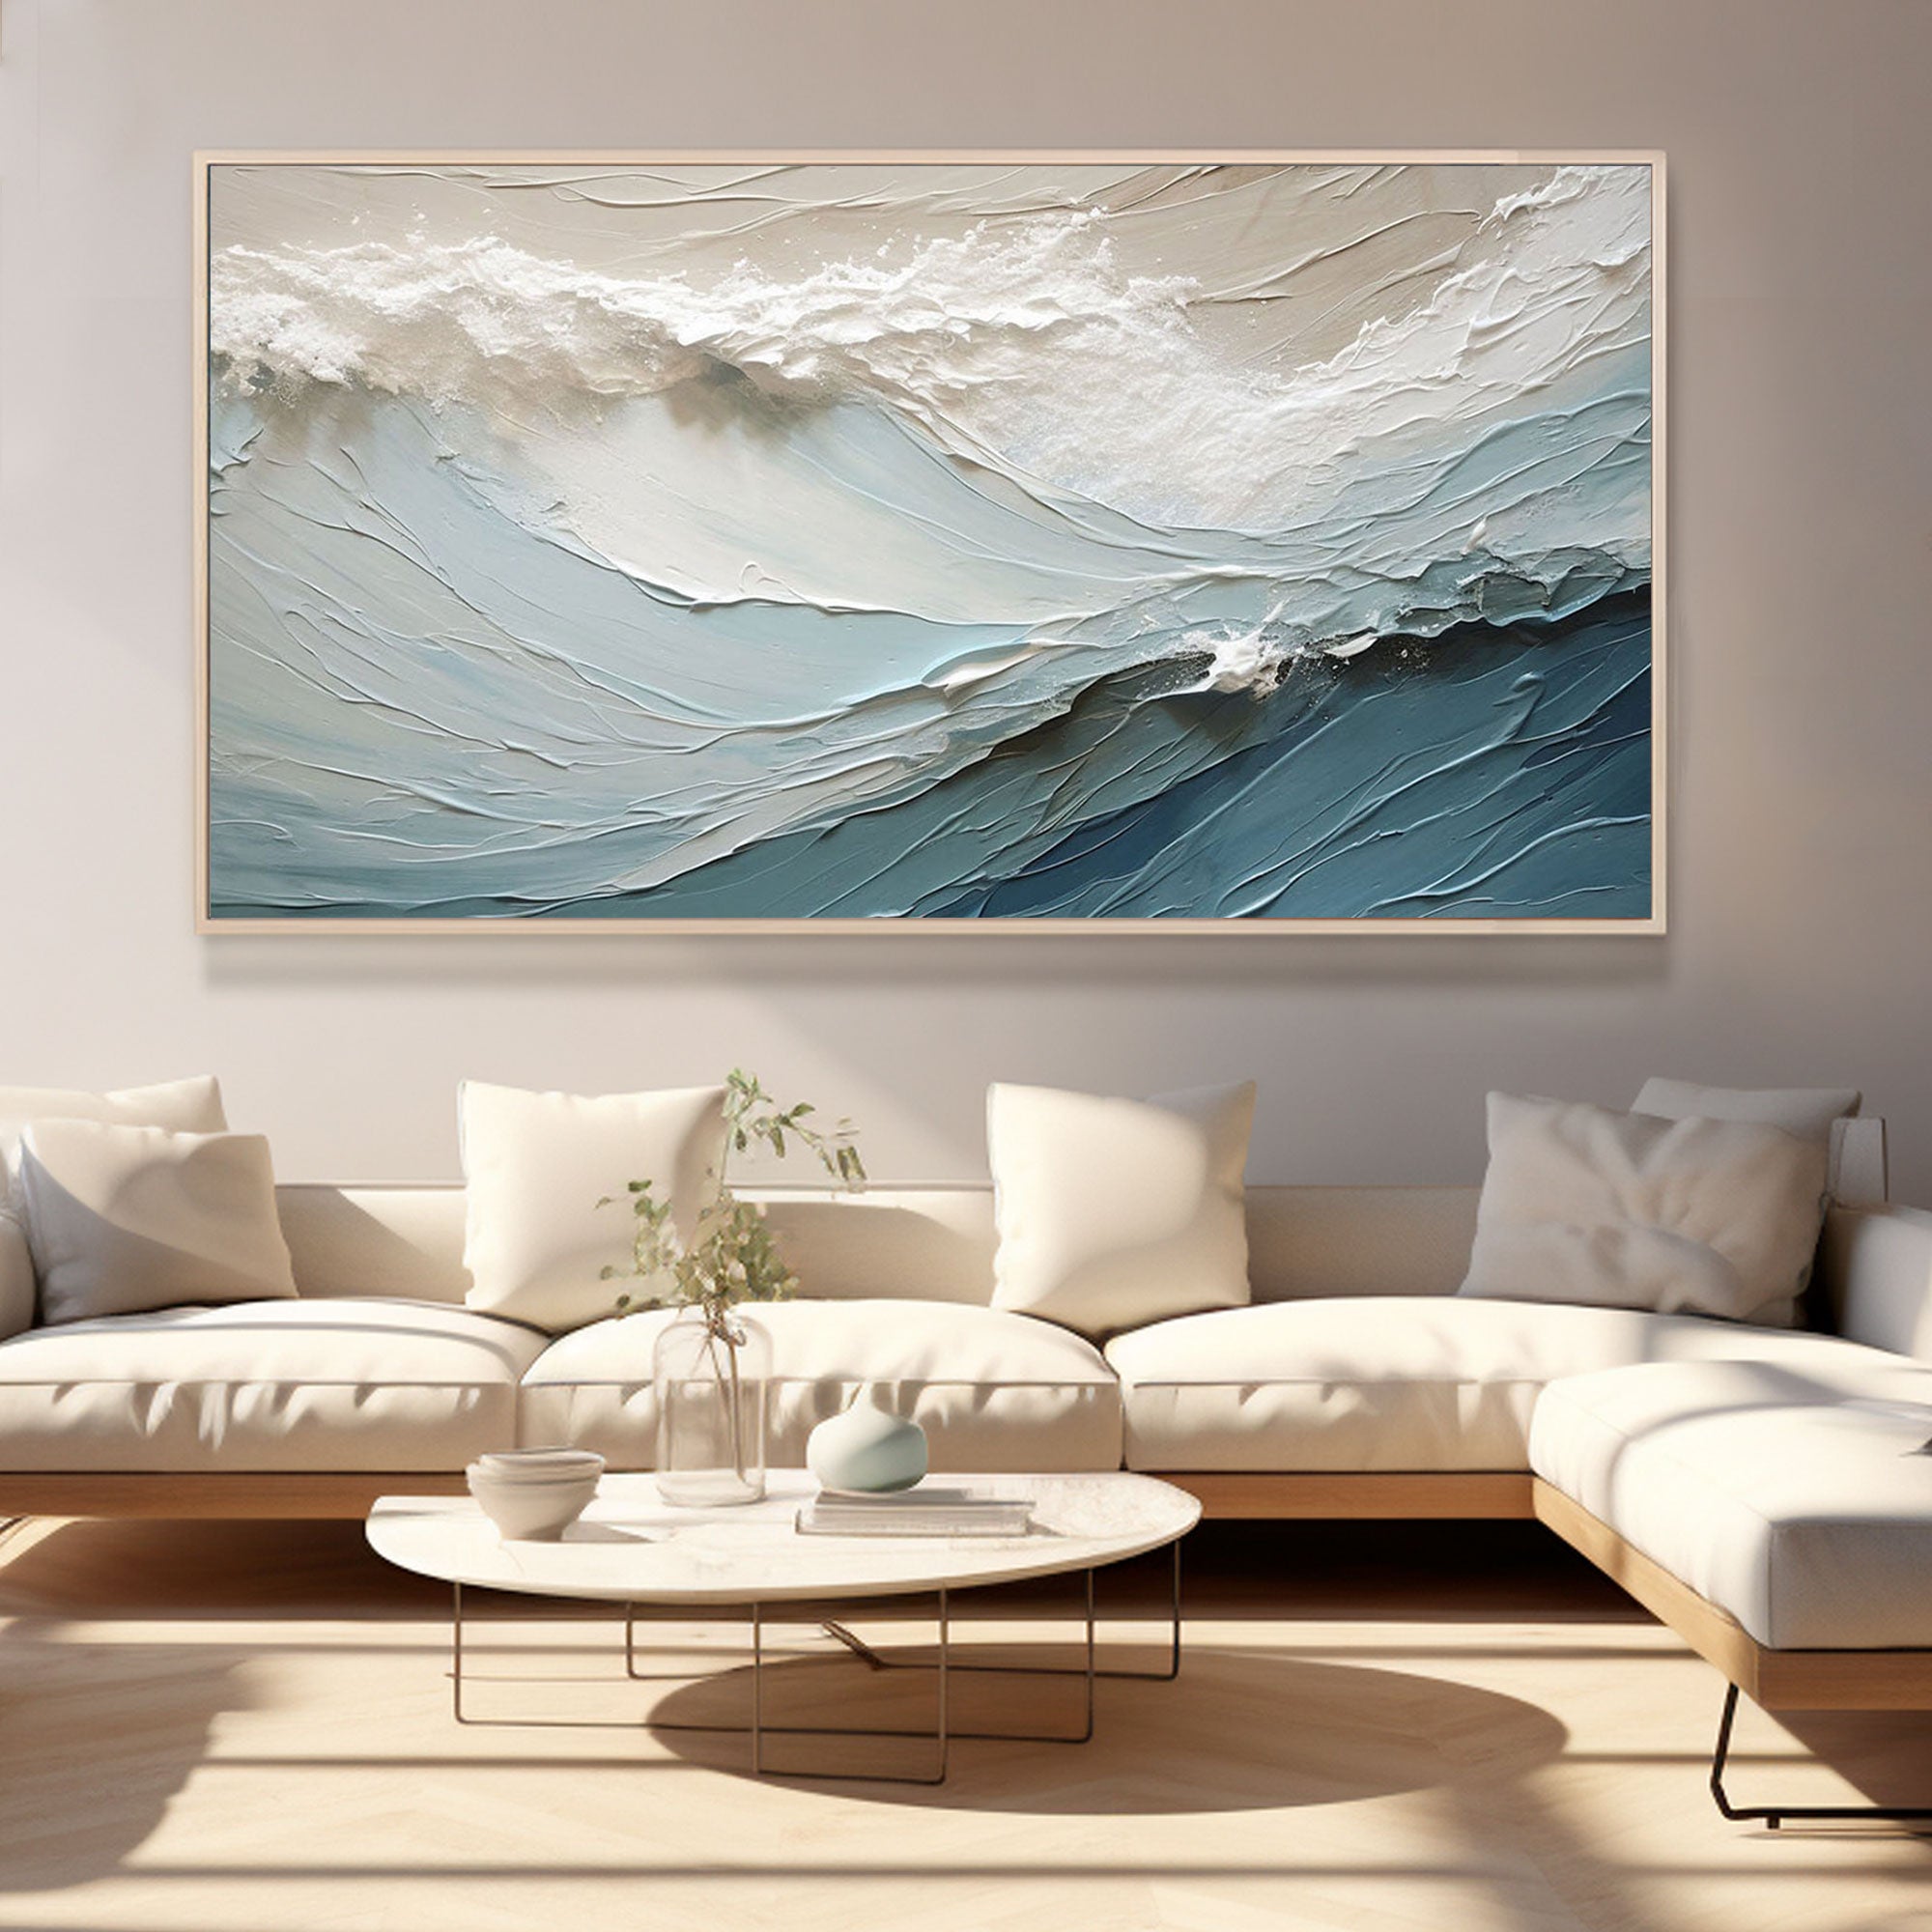 3D Textured Blue Abstract Art Painting "Surge"